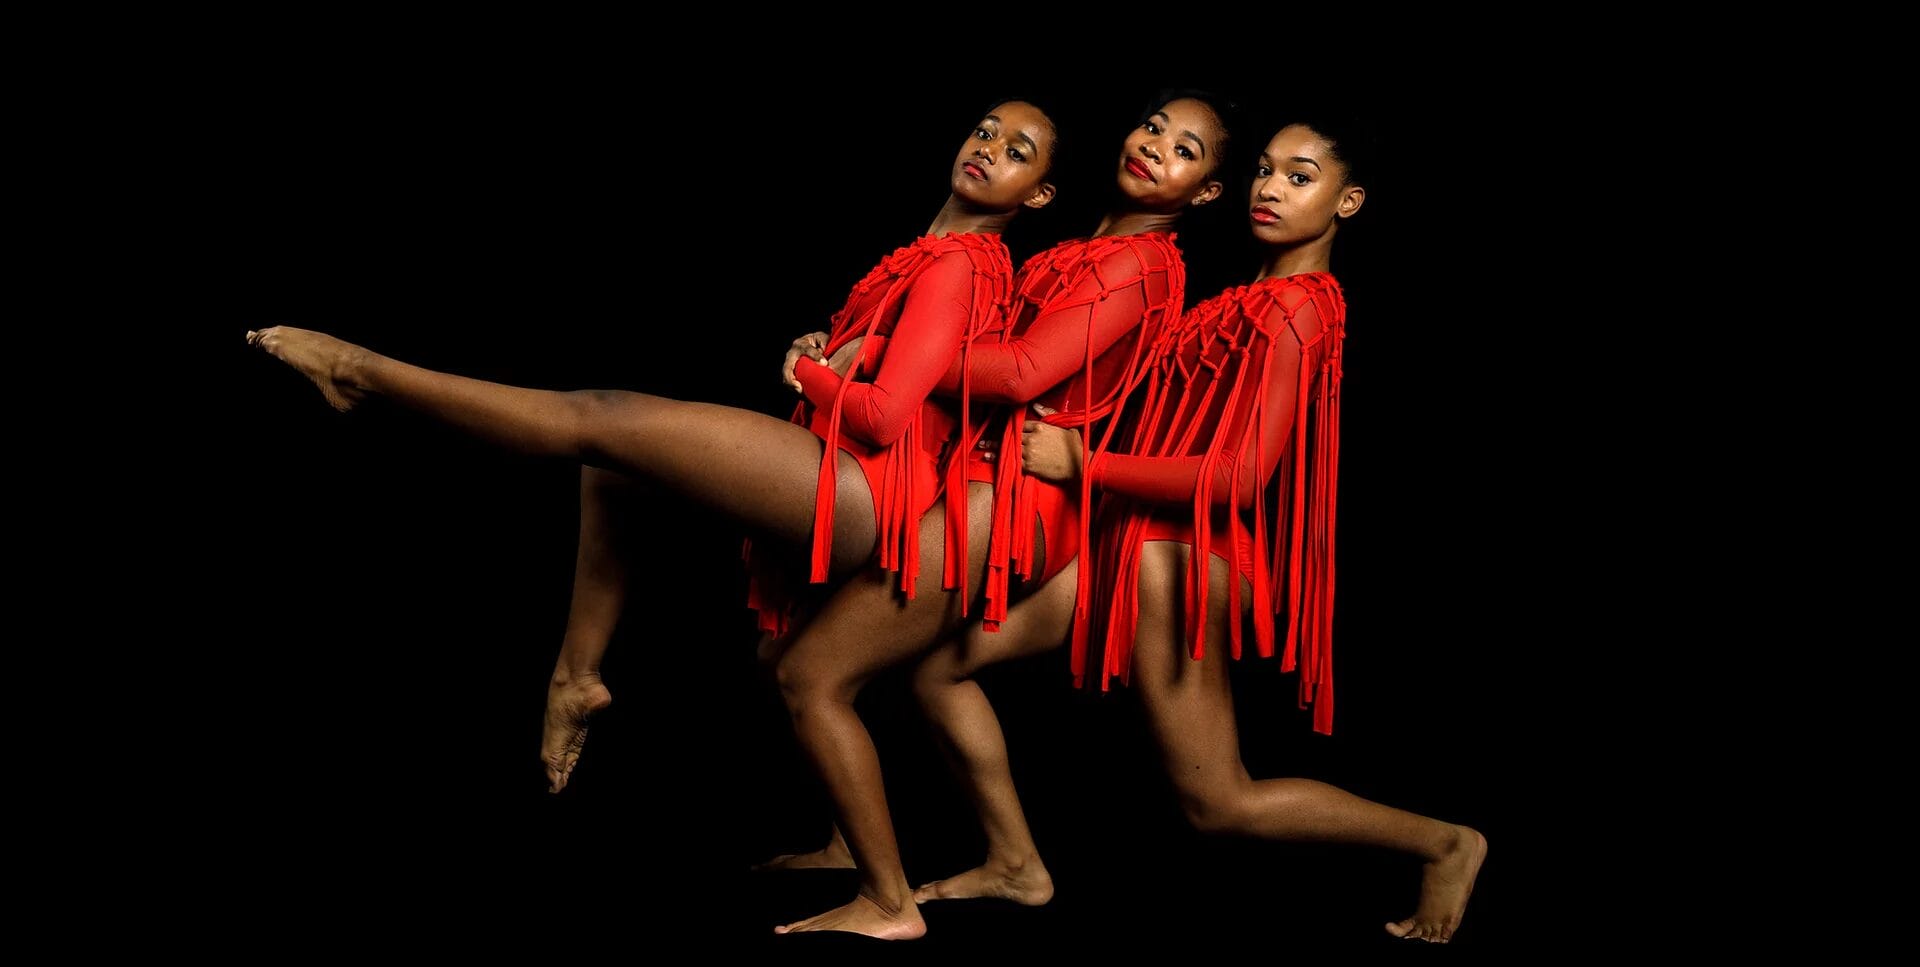 Three dancers in red fringe costumes posing against a black background.